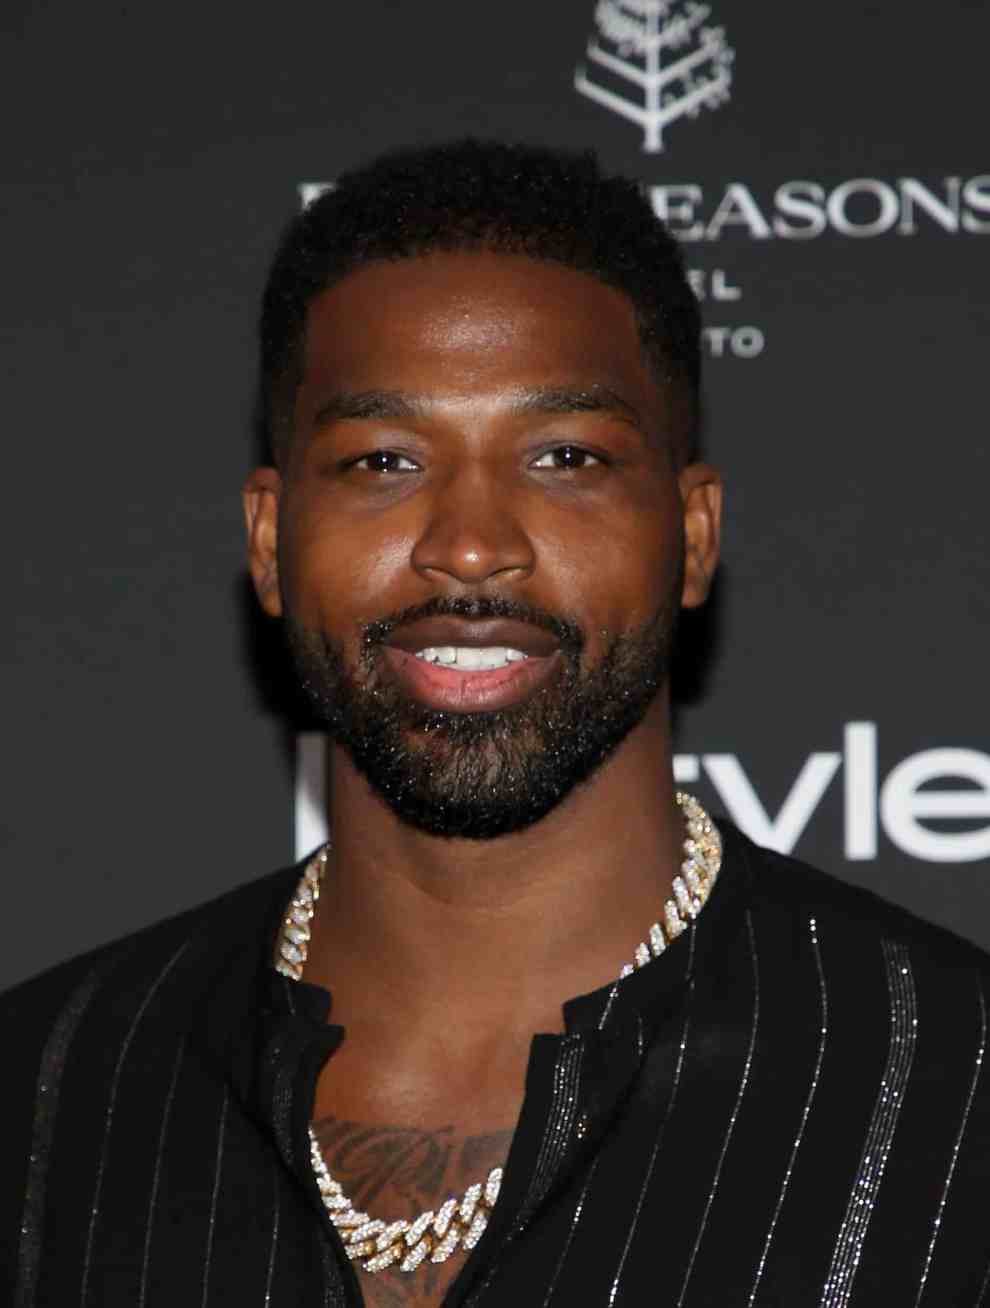 Tristan Thompson attends The Hollywood Foreign Press Association and InStyle Party during 2018 Toronto International Film Festival at Four Seasons Hotel on September 8, 2018 in Toronto, Canada